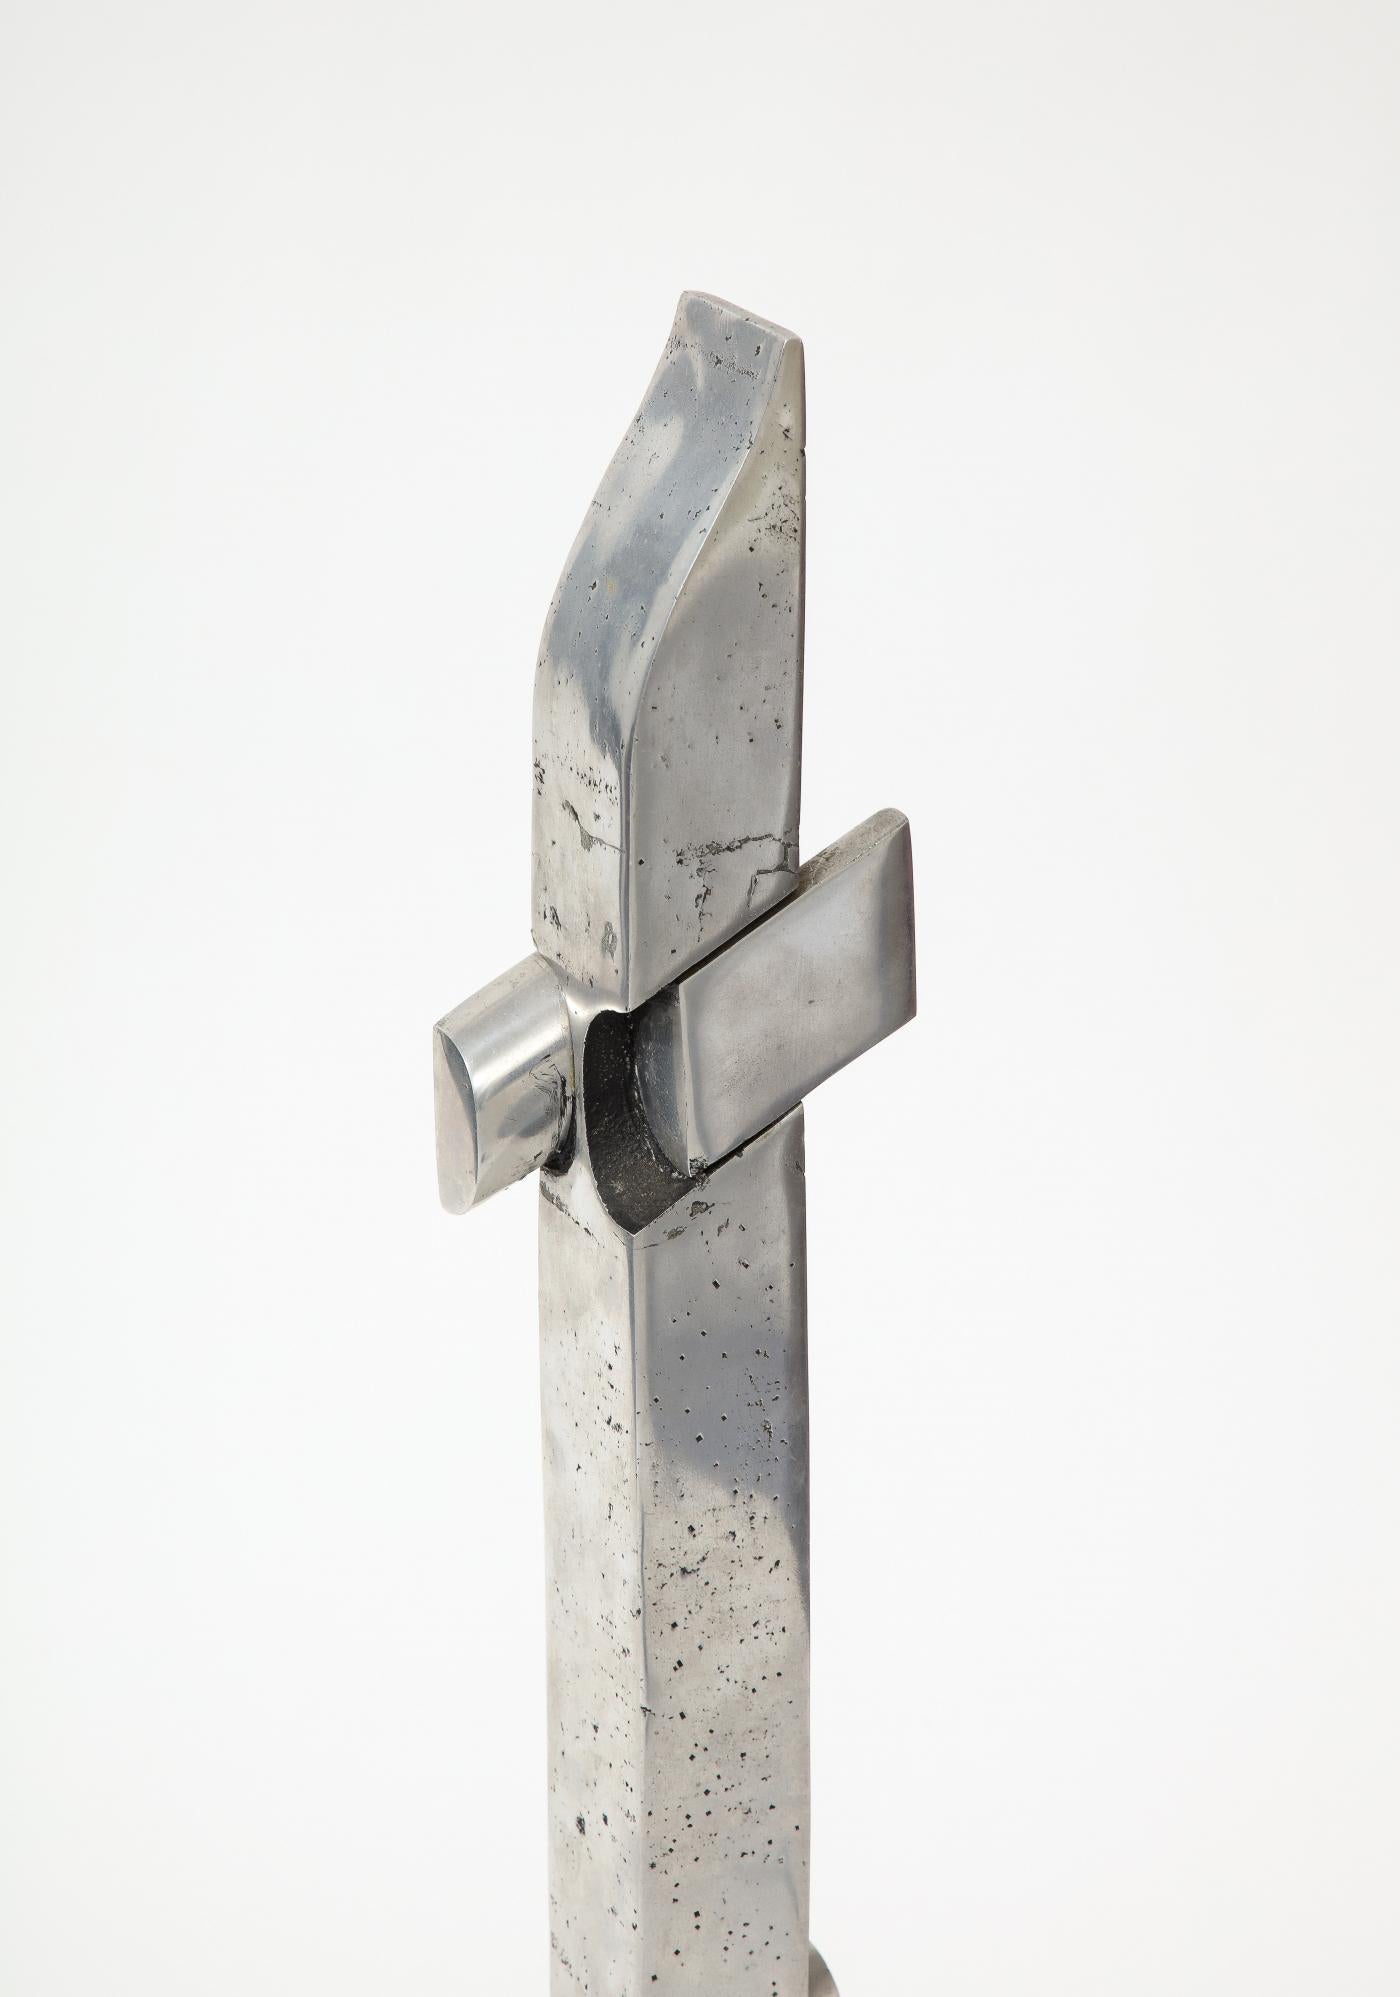 Abstract Chromed Steel Sculpture by Thibaud Weisz, c. 1950 For Sale 3